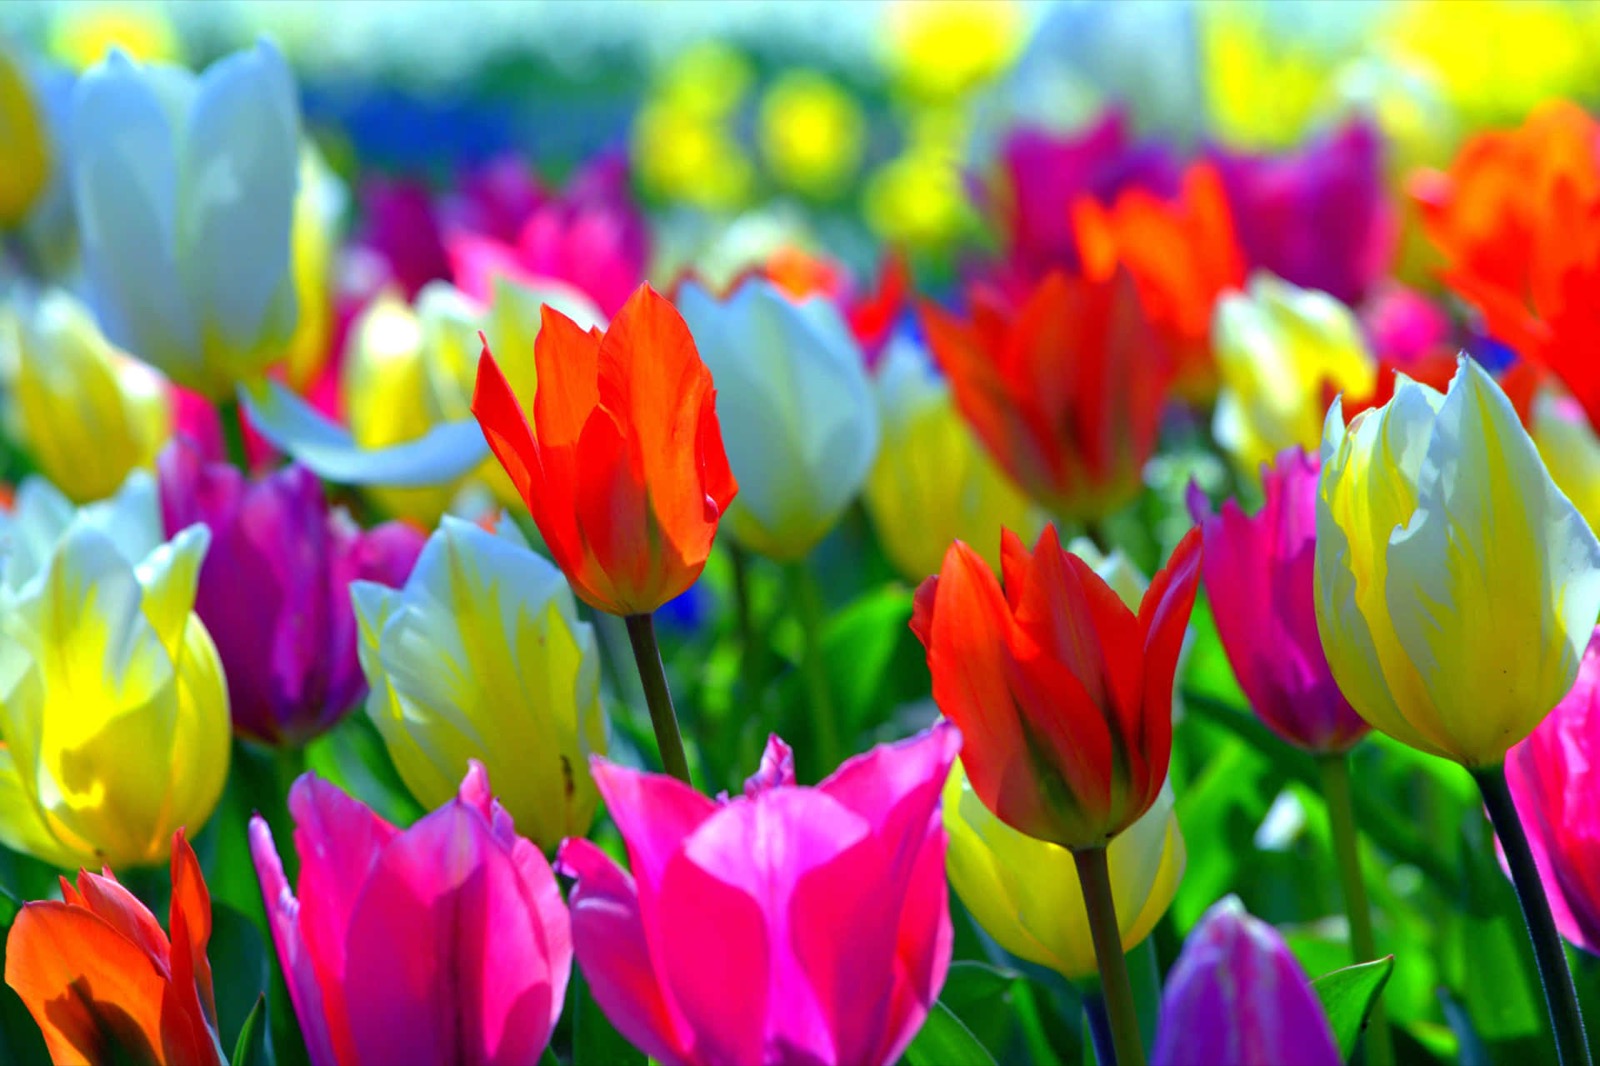 Colorful spring flowers